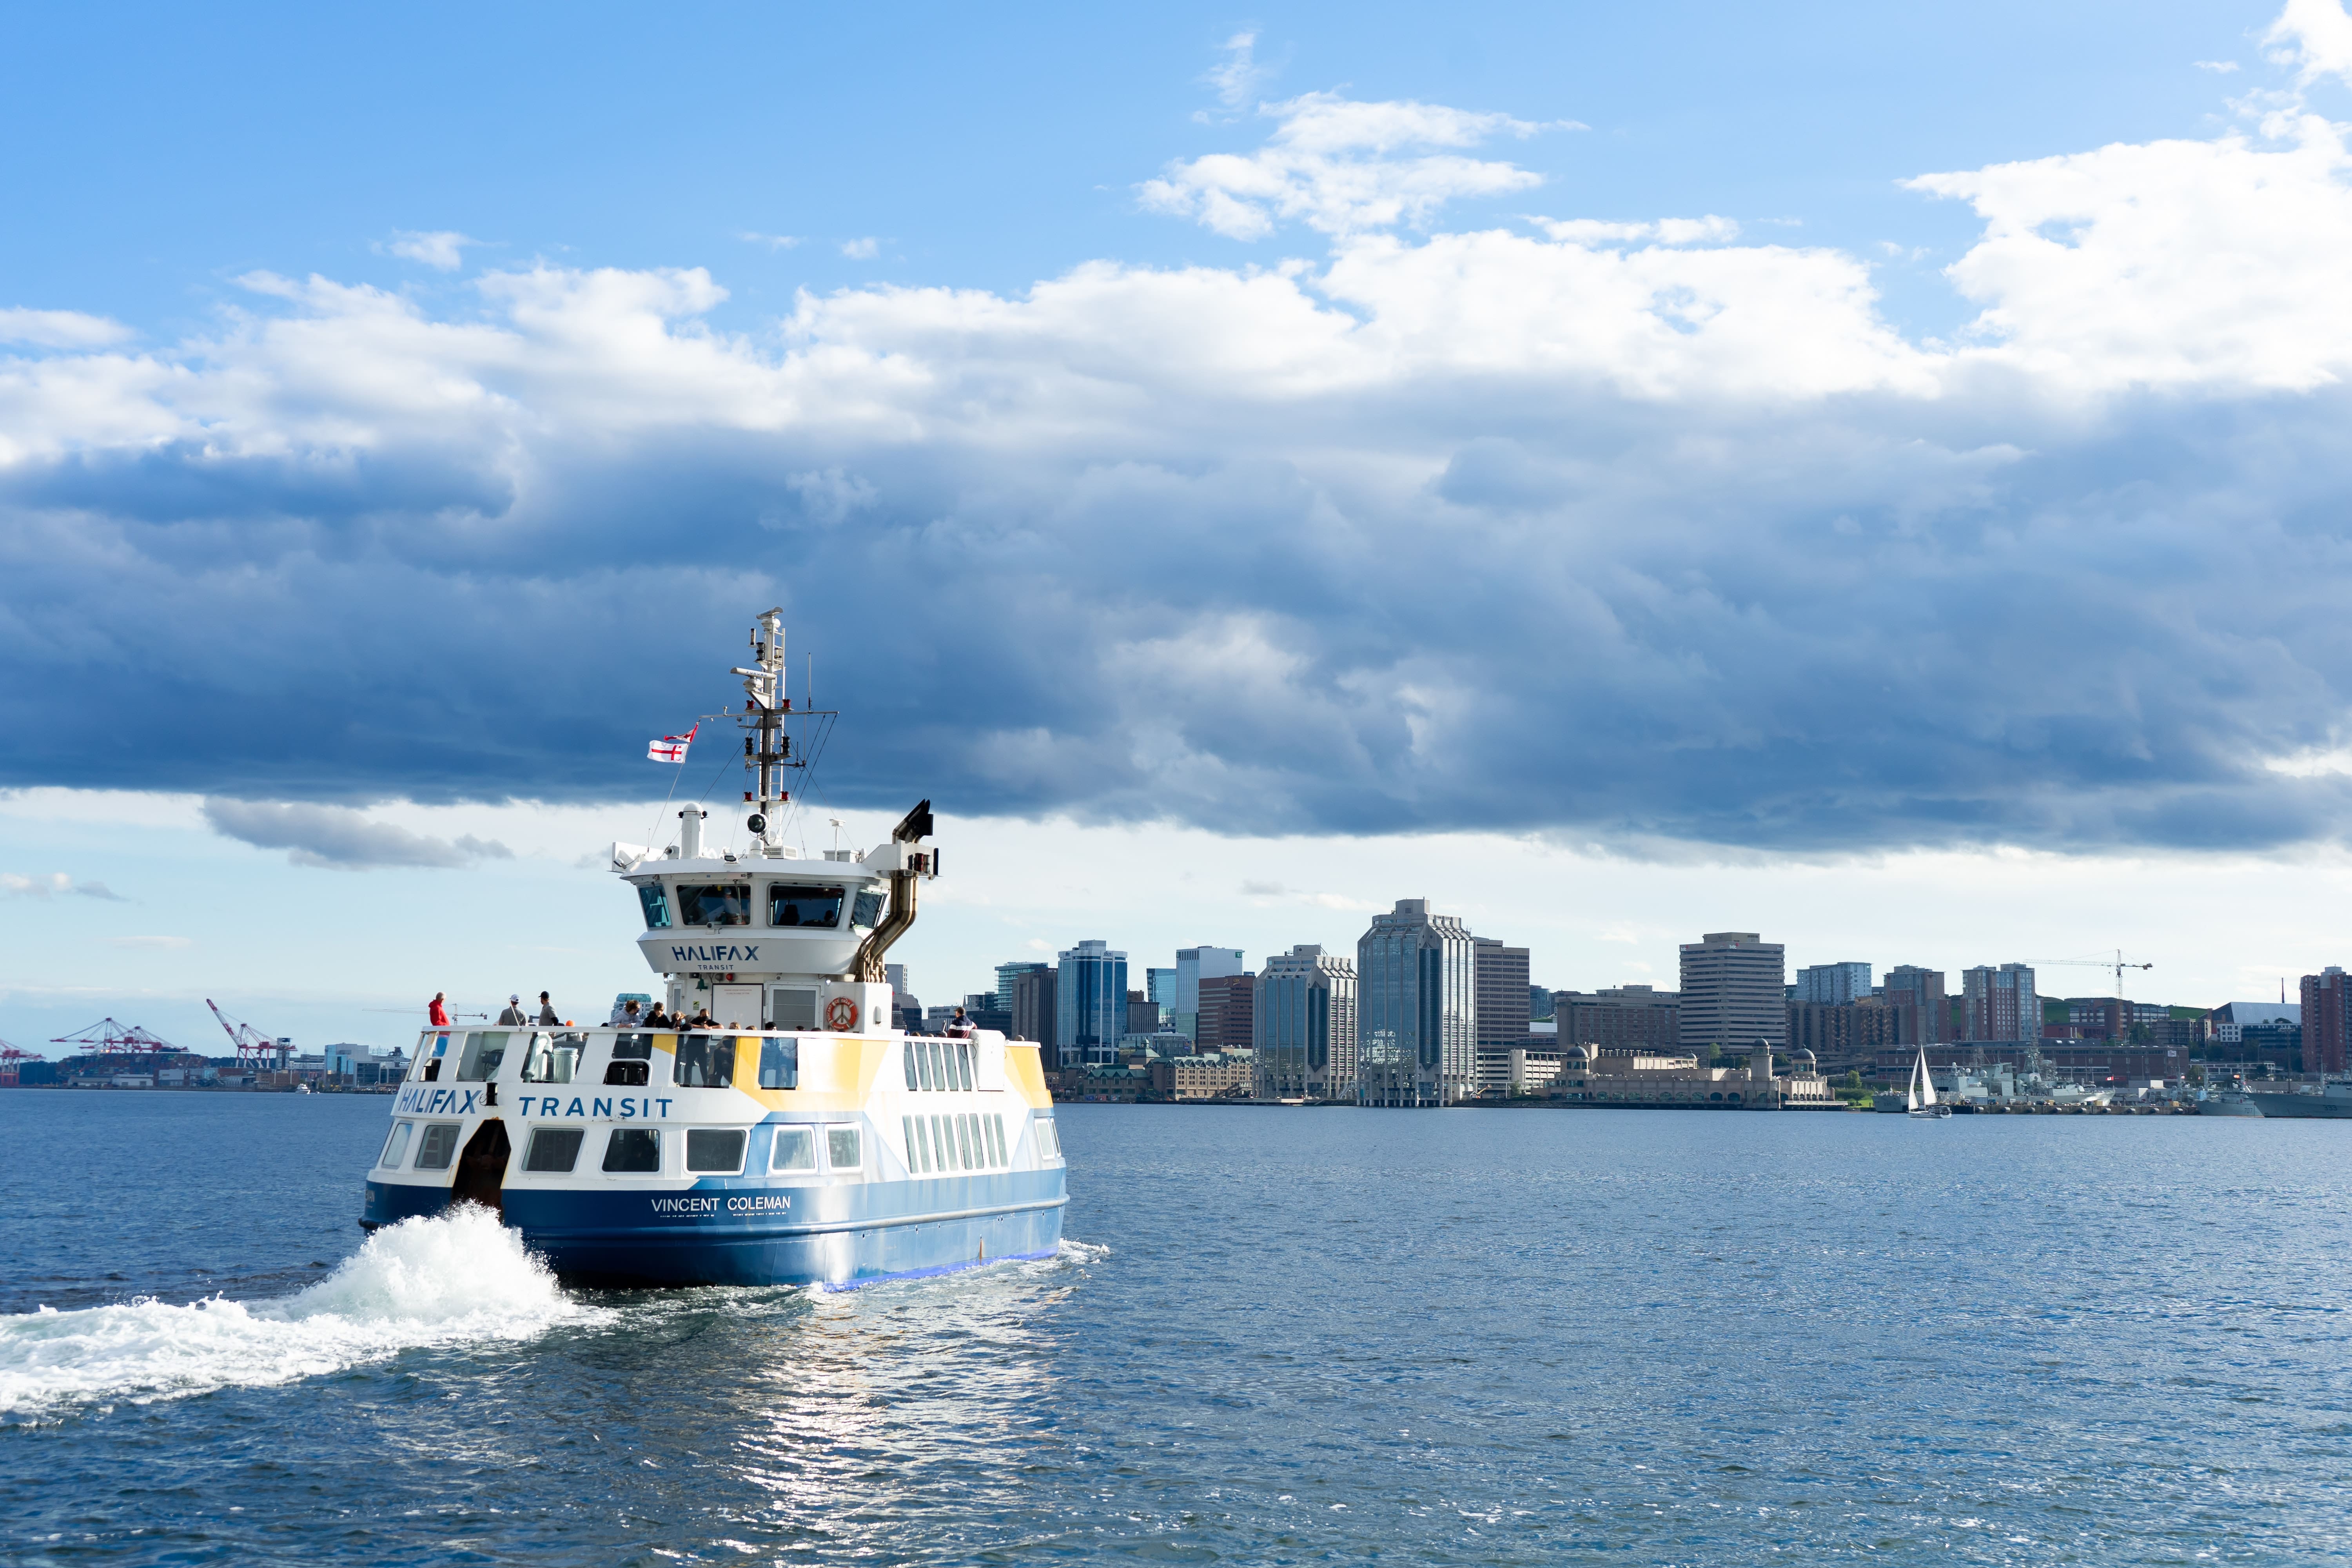 Picture of Halifax Transit Boat travelling across the harbor